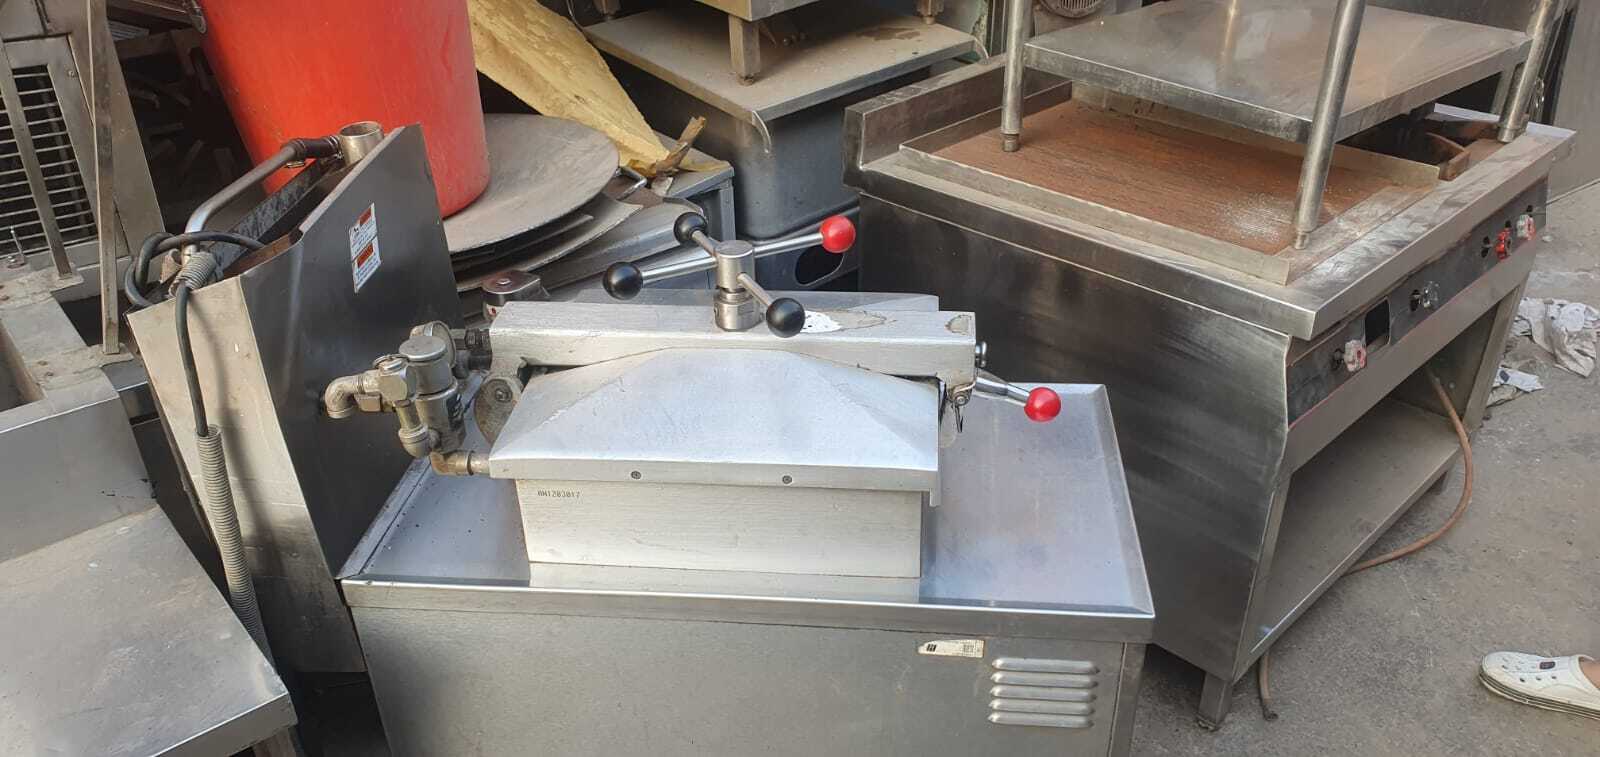 Used Henny Penny Pressure Fryer Used Henny Penny Deep Fryer for sale